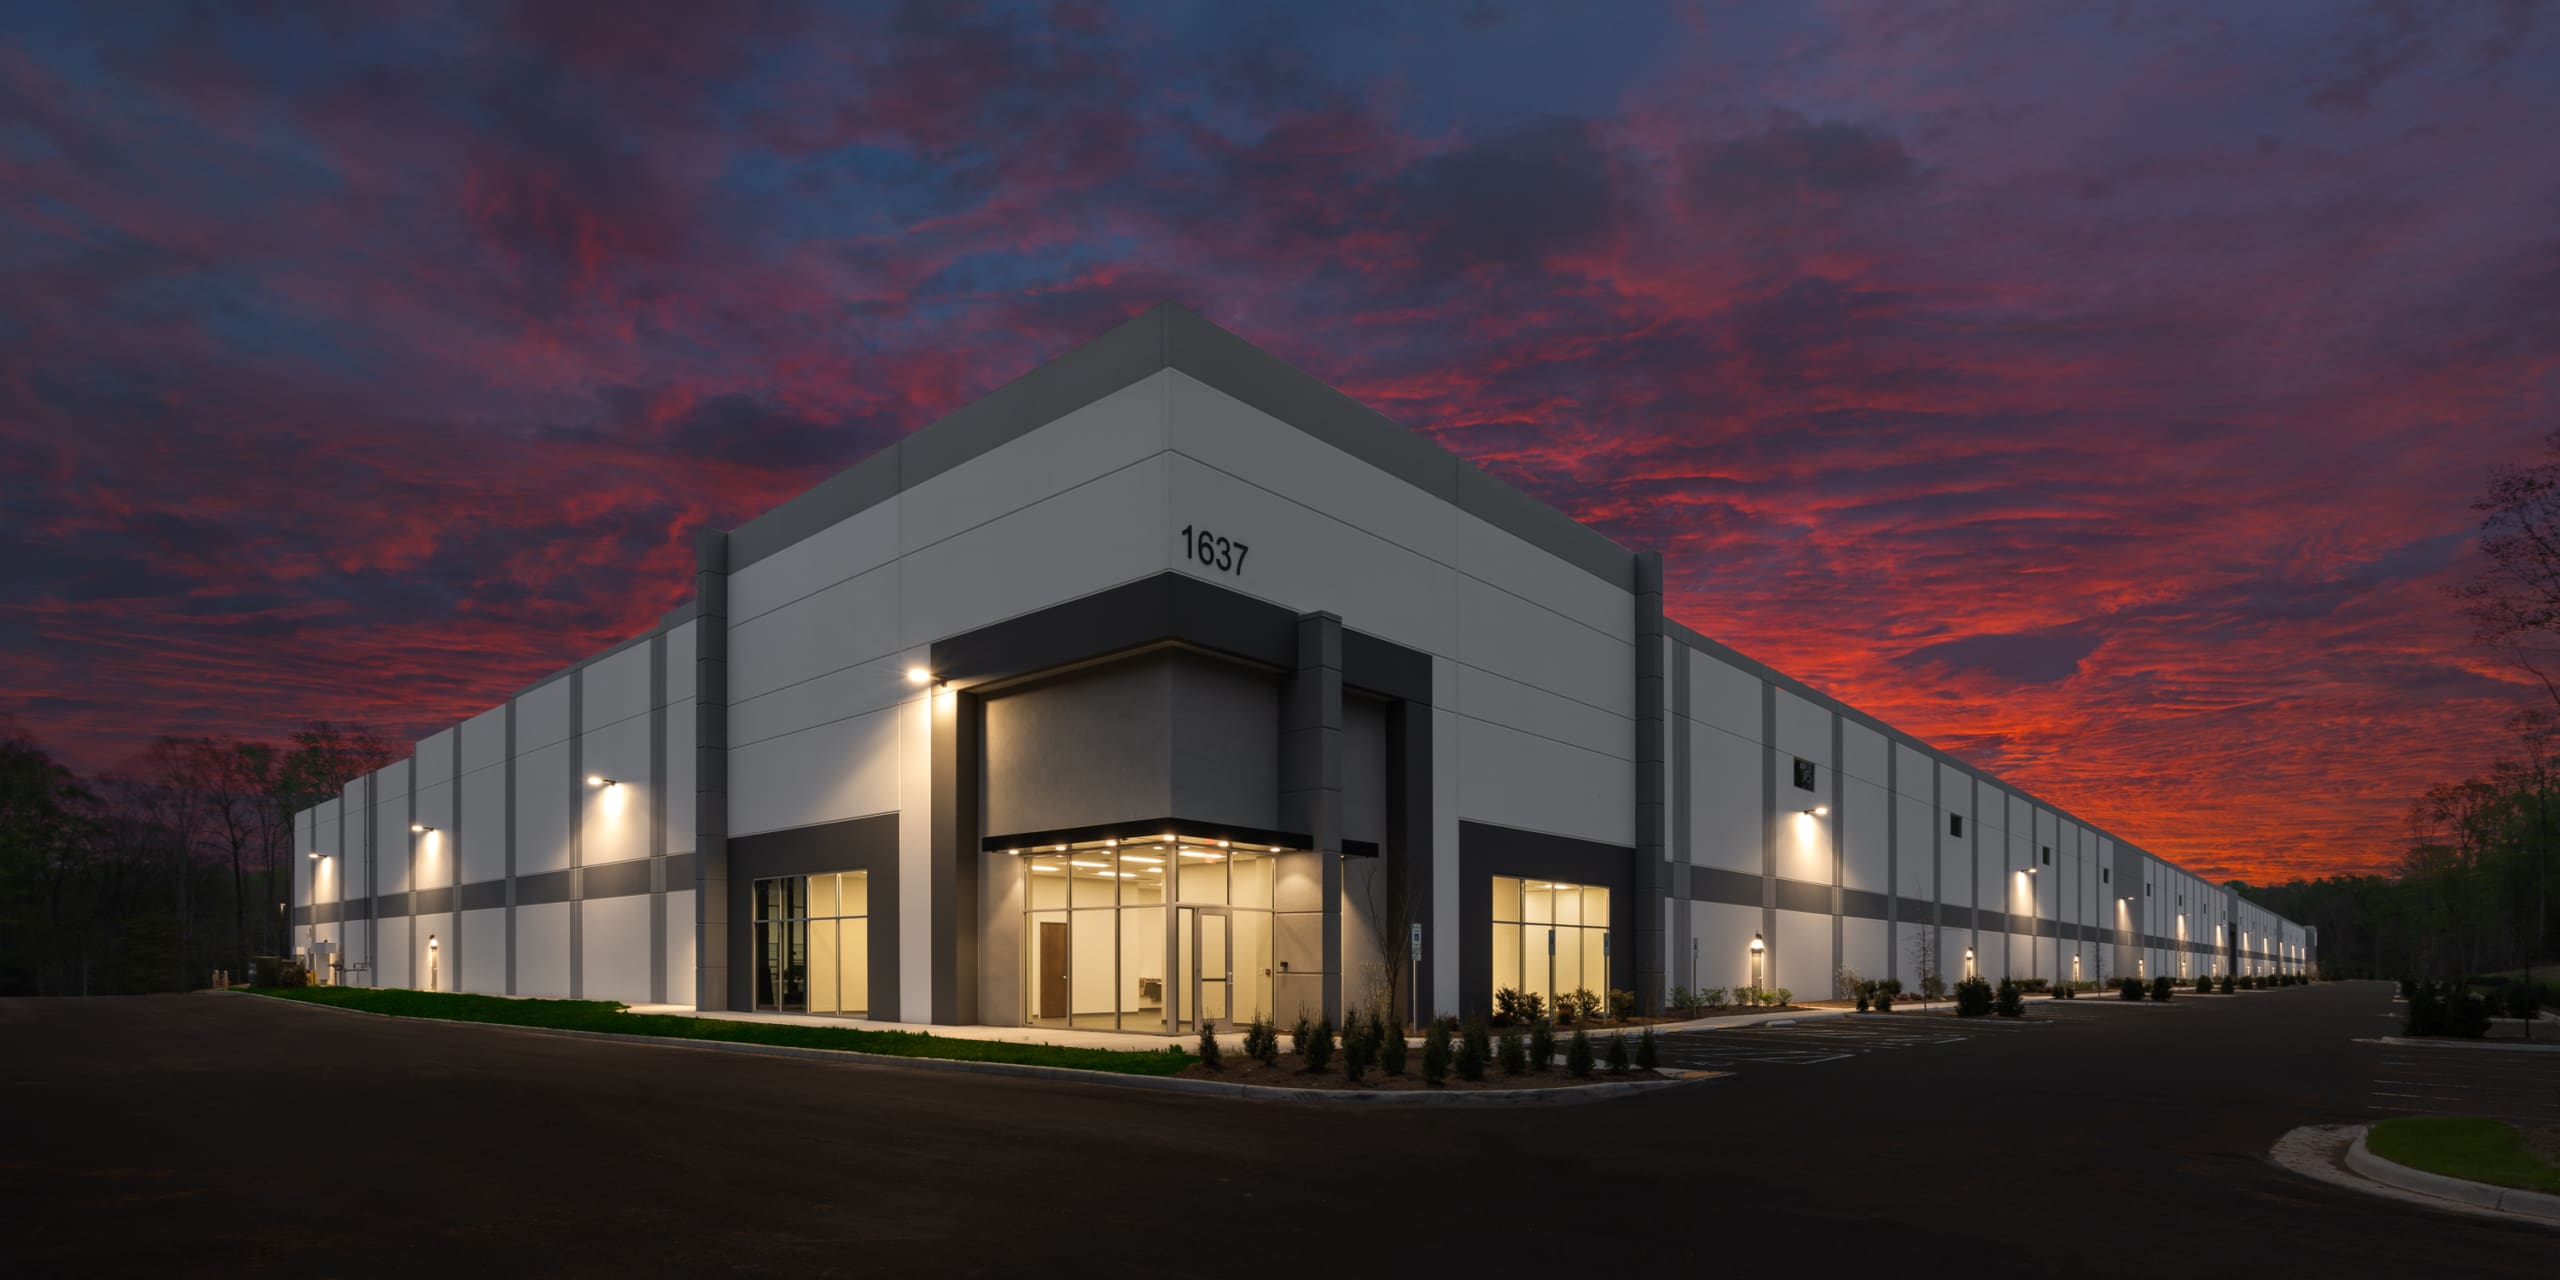 Modern industrial warehouse building photographed at dusk with illuminated exterior and vibrant red sky.